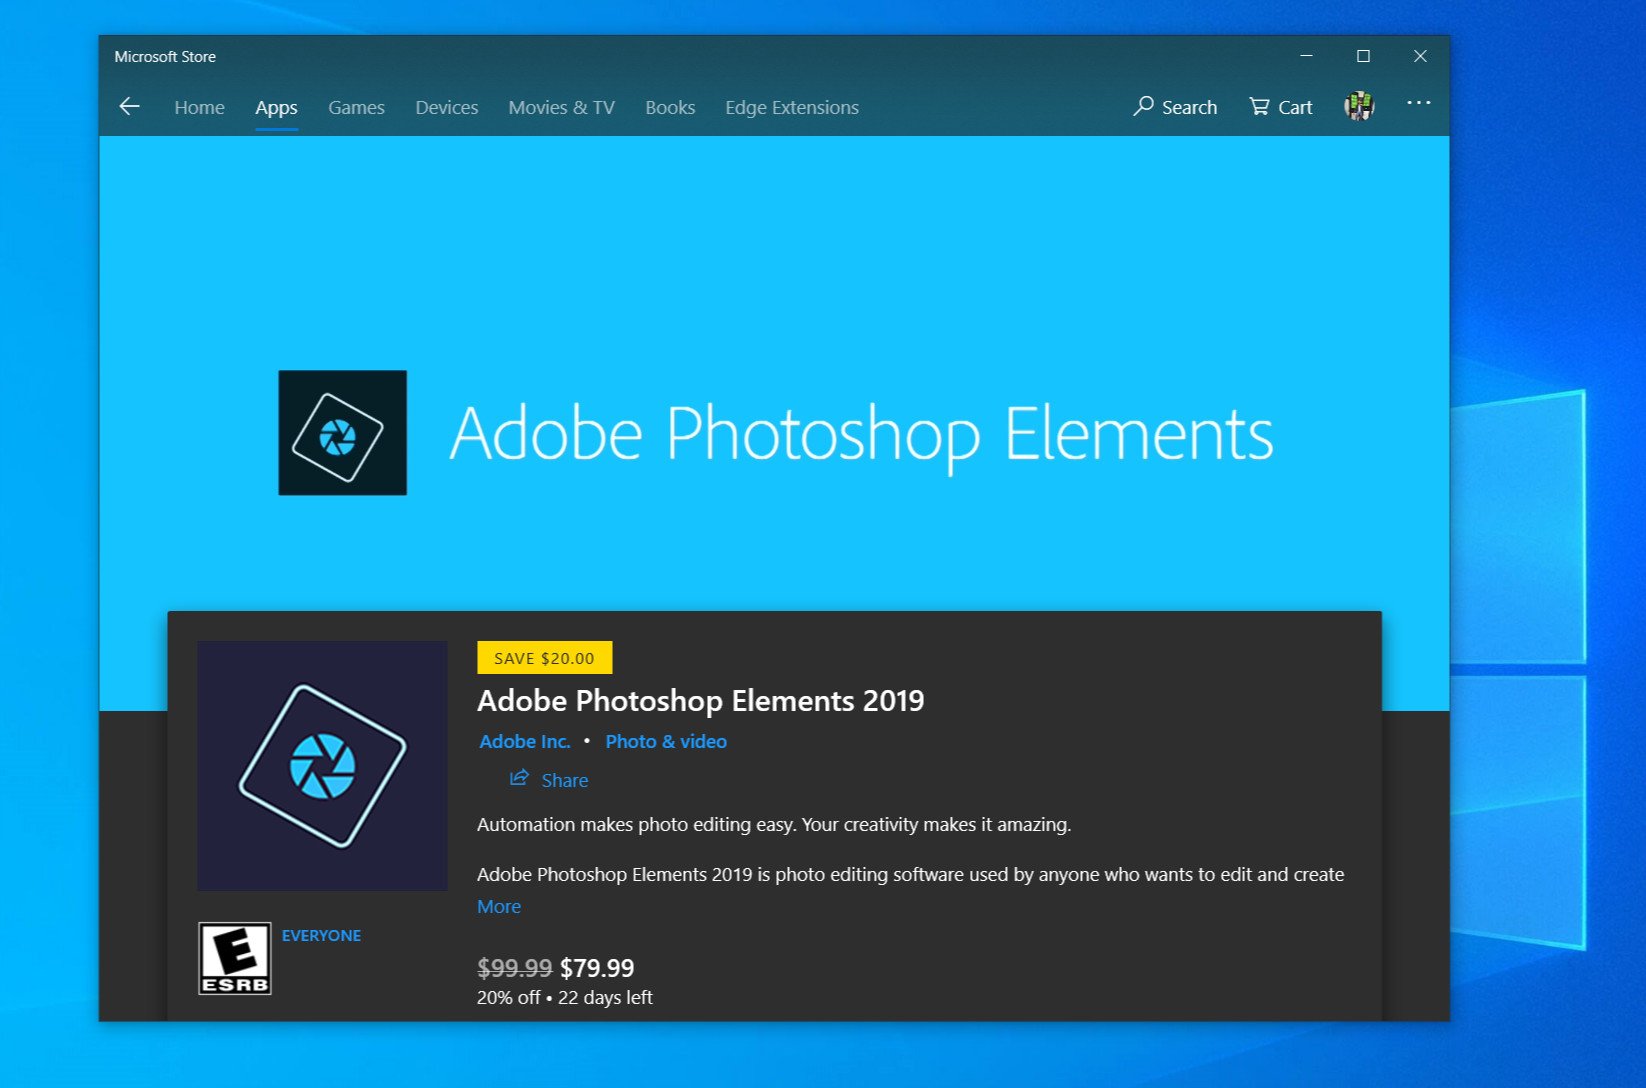 Adobe Photoshop Elements 2019 now available on the Microsoft Store for